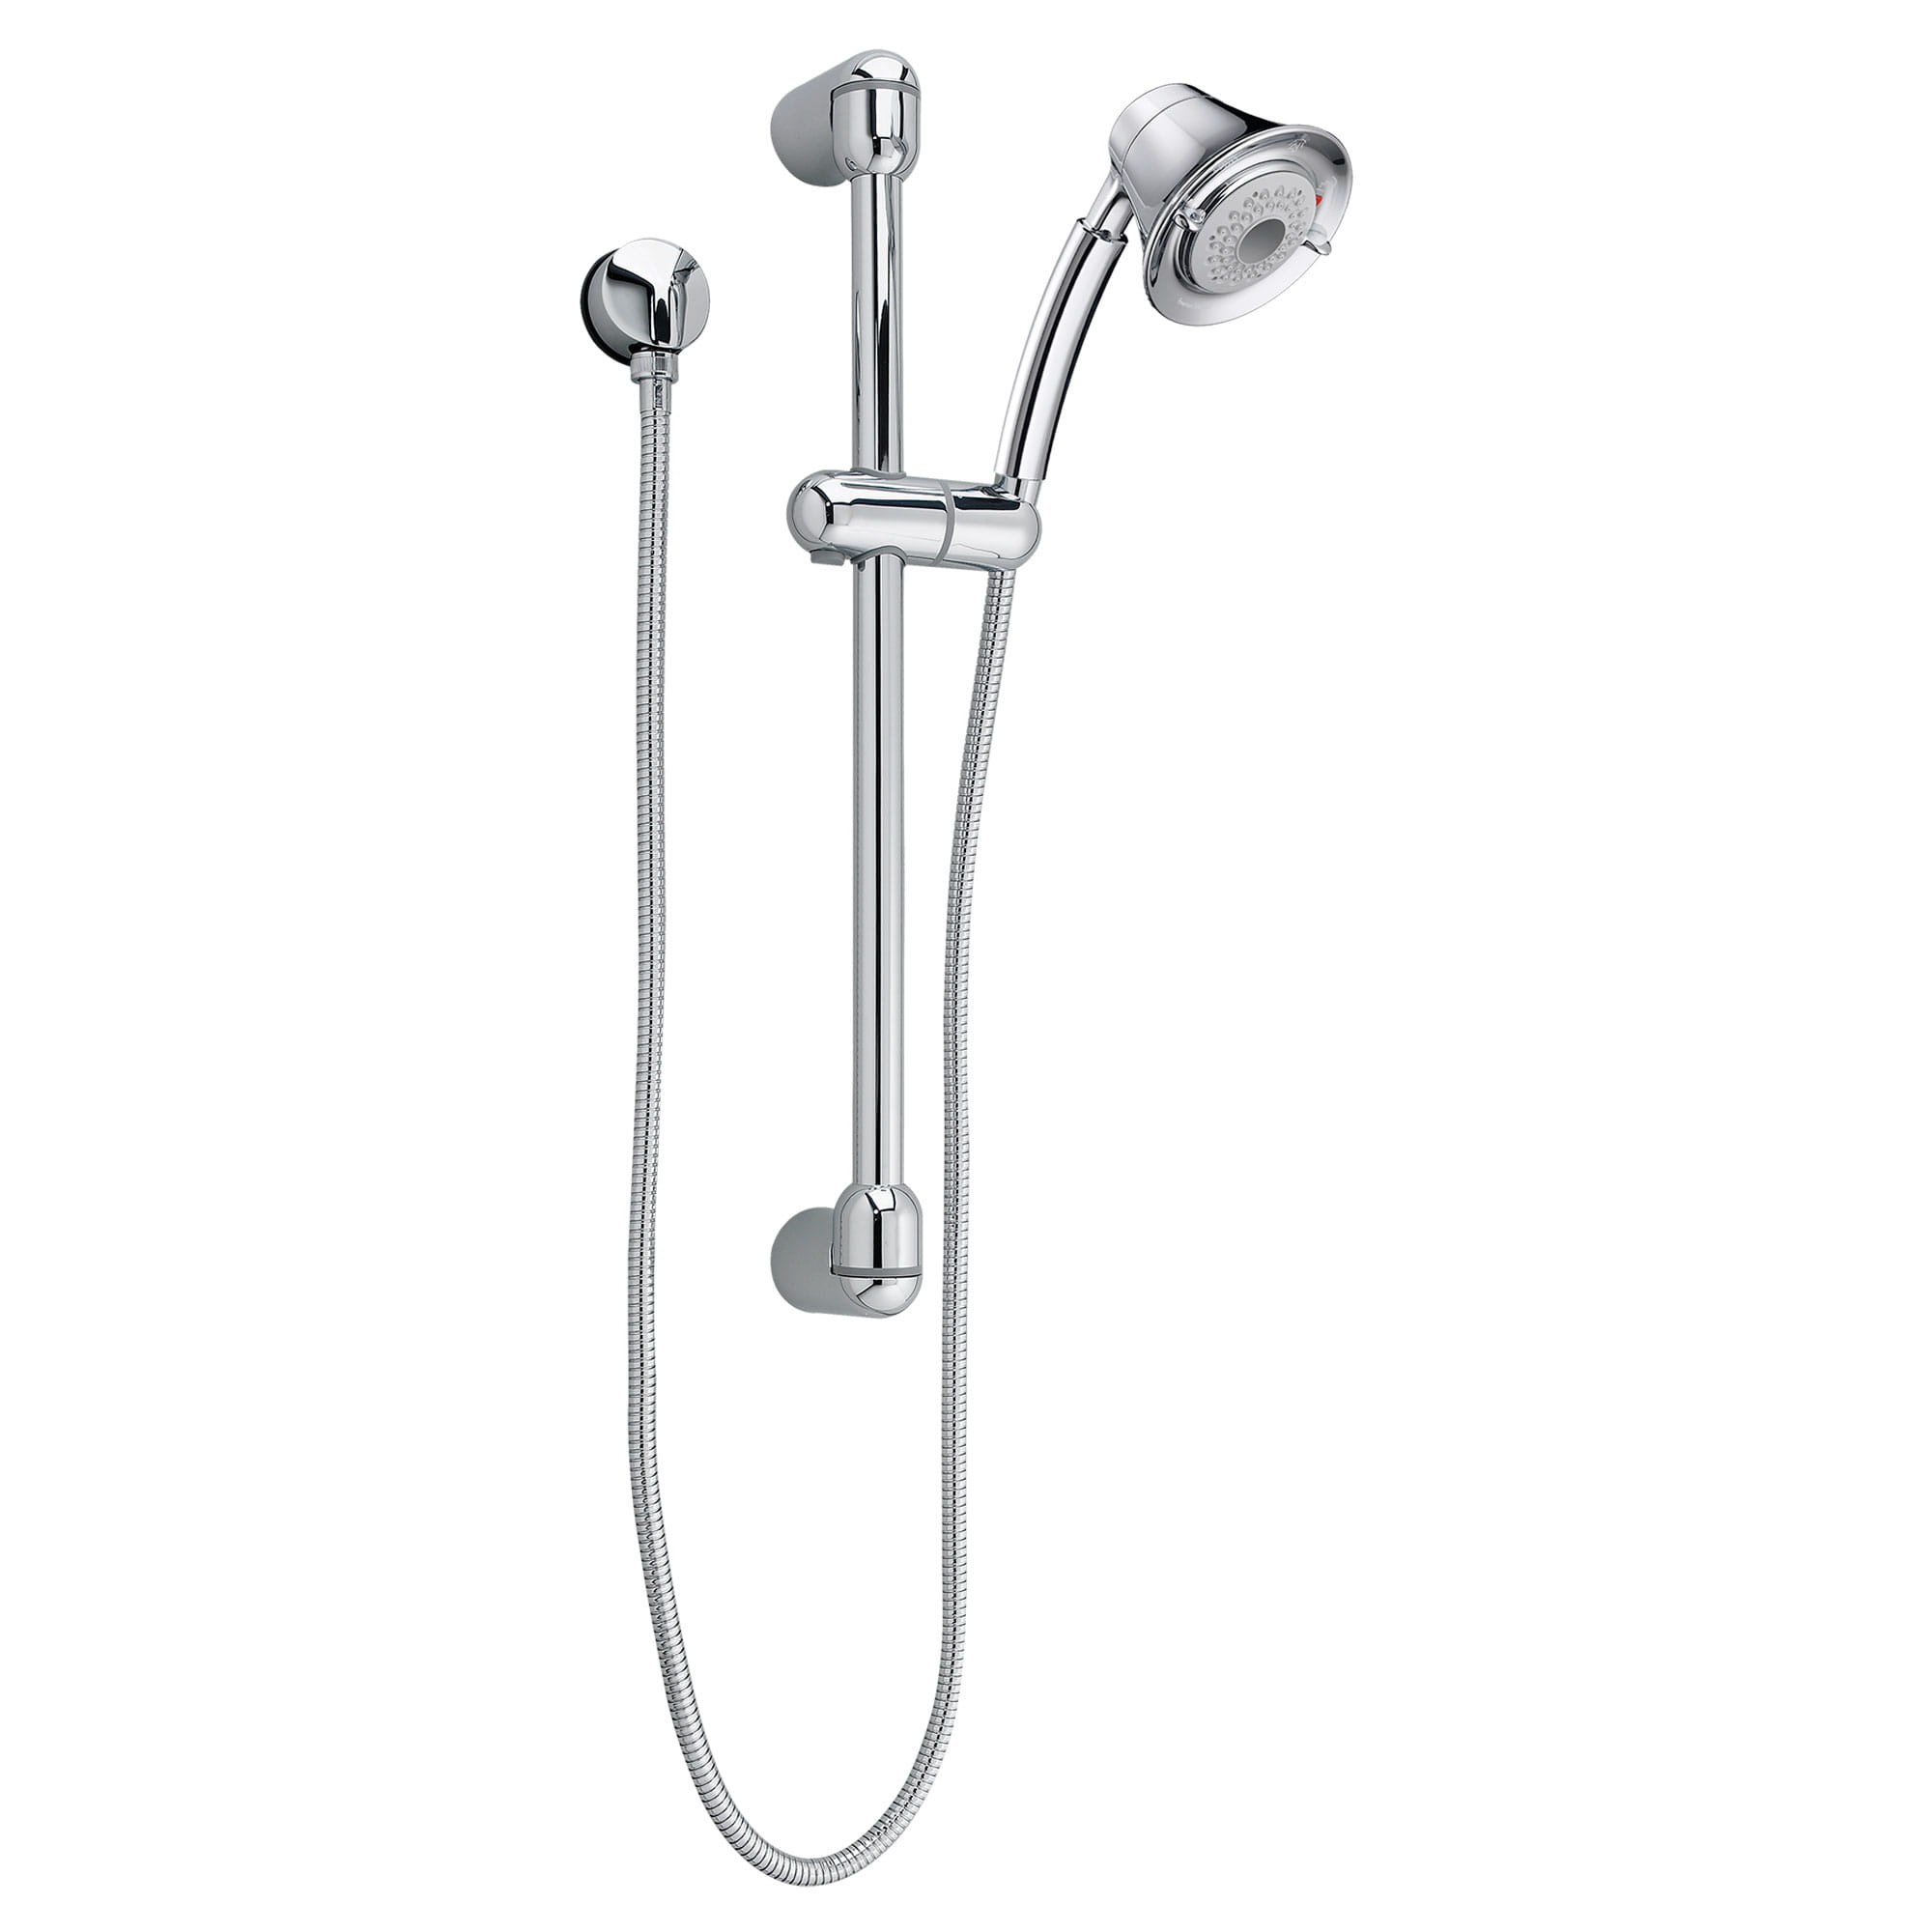 FloWise 25 In 3 Function 20 GPM Shower System CHROME